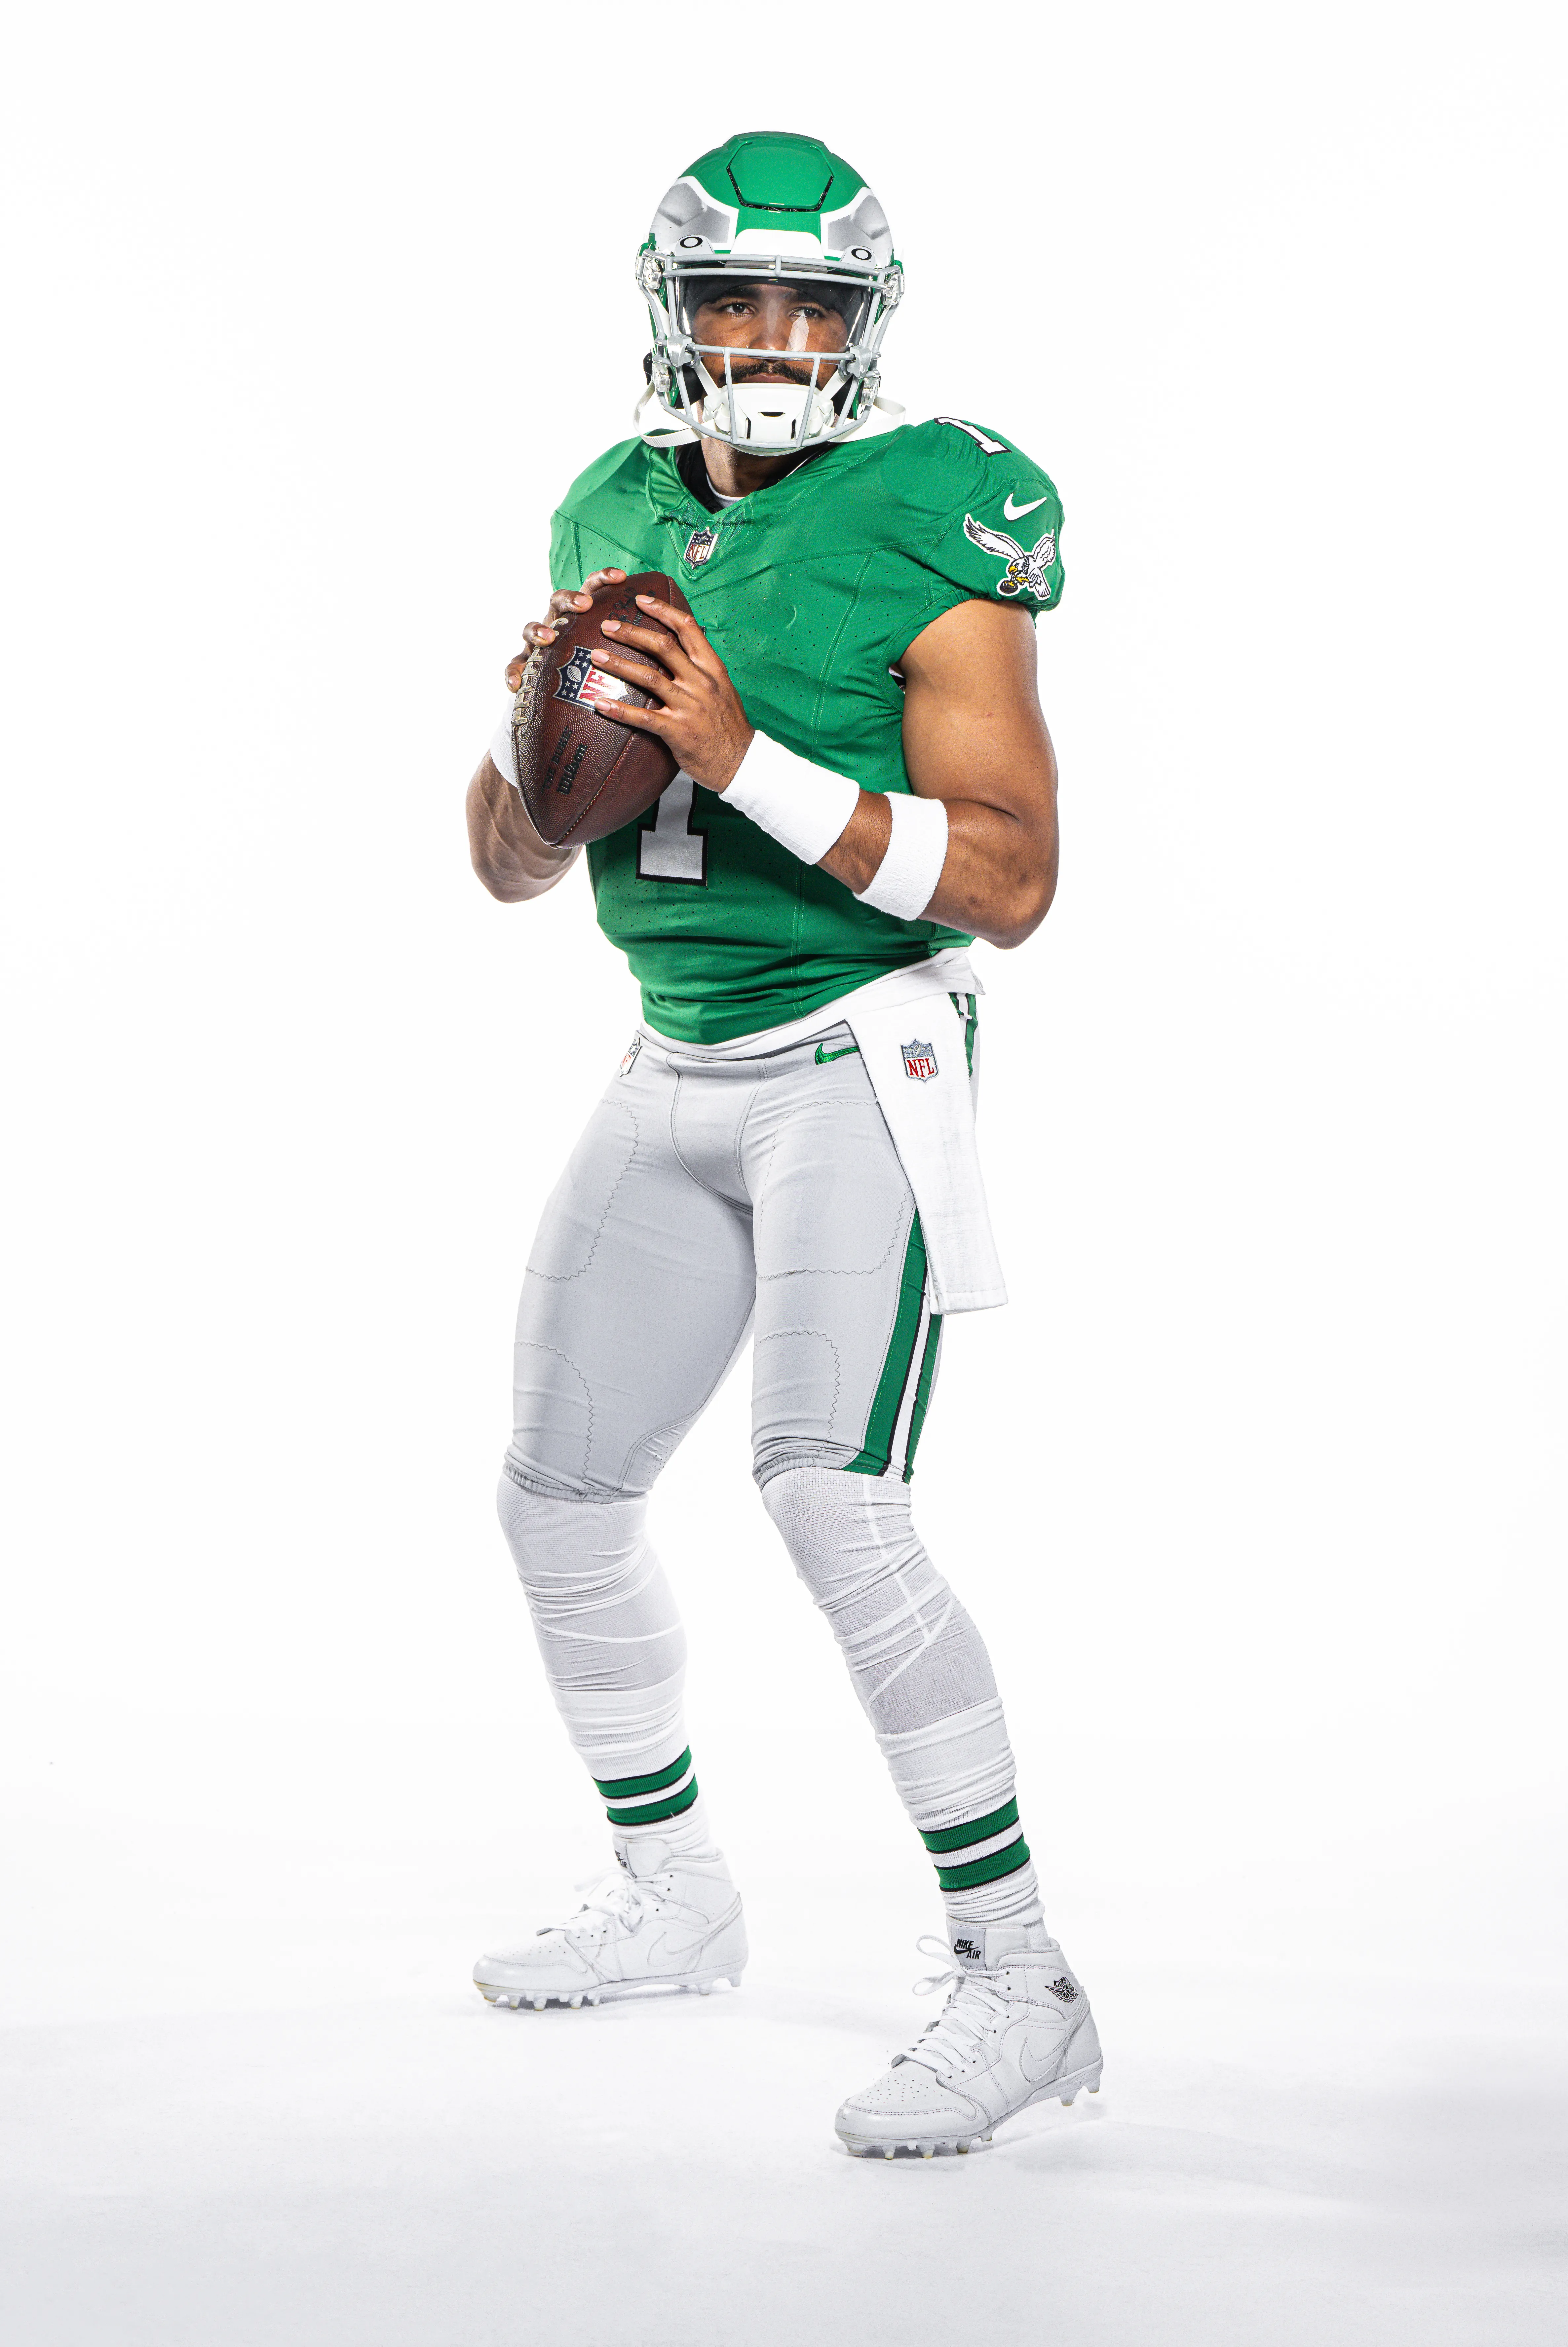 At last: Eagles will wear their old kelly green uniforms this season